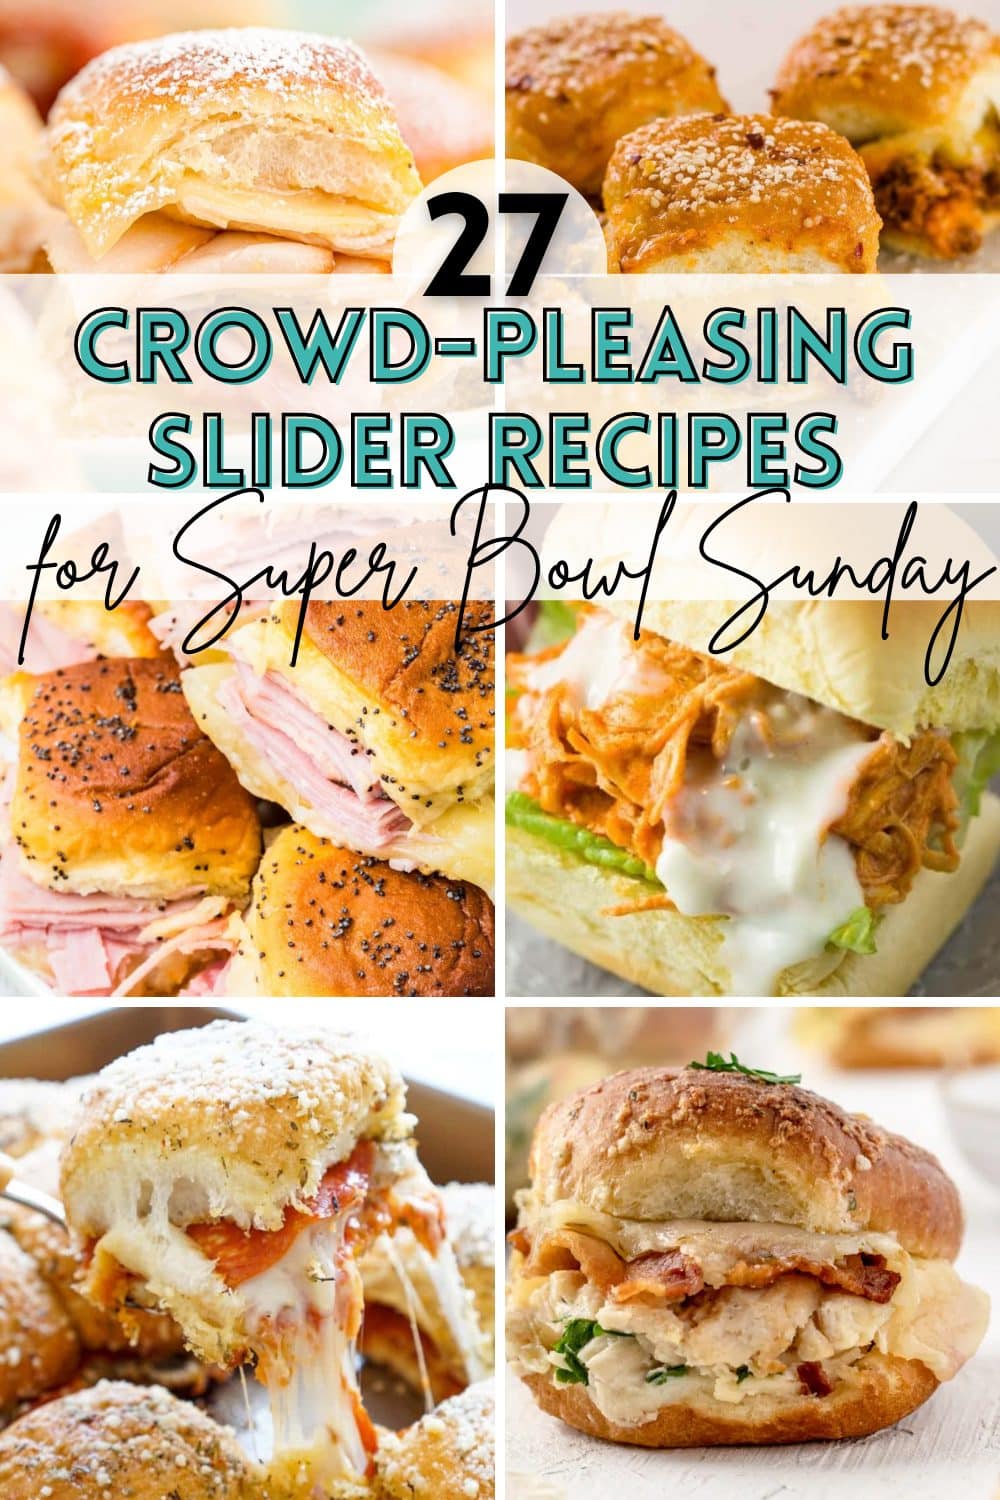 6 images of delicious slider recipes for Super Bowl Tailgating